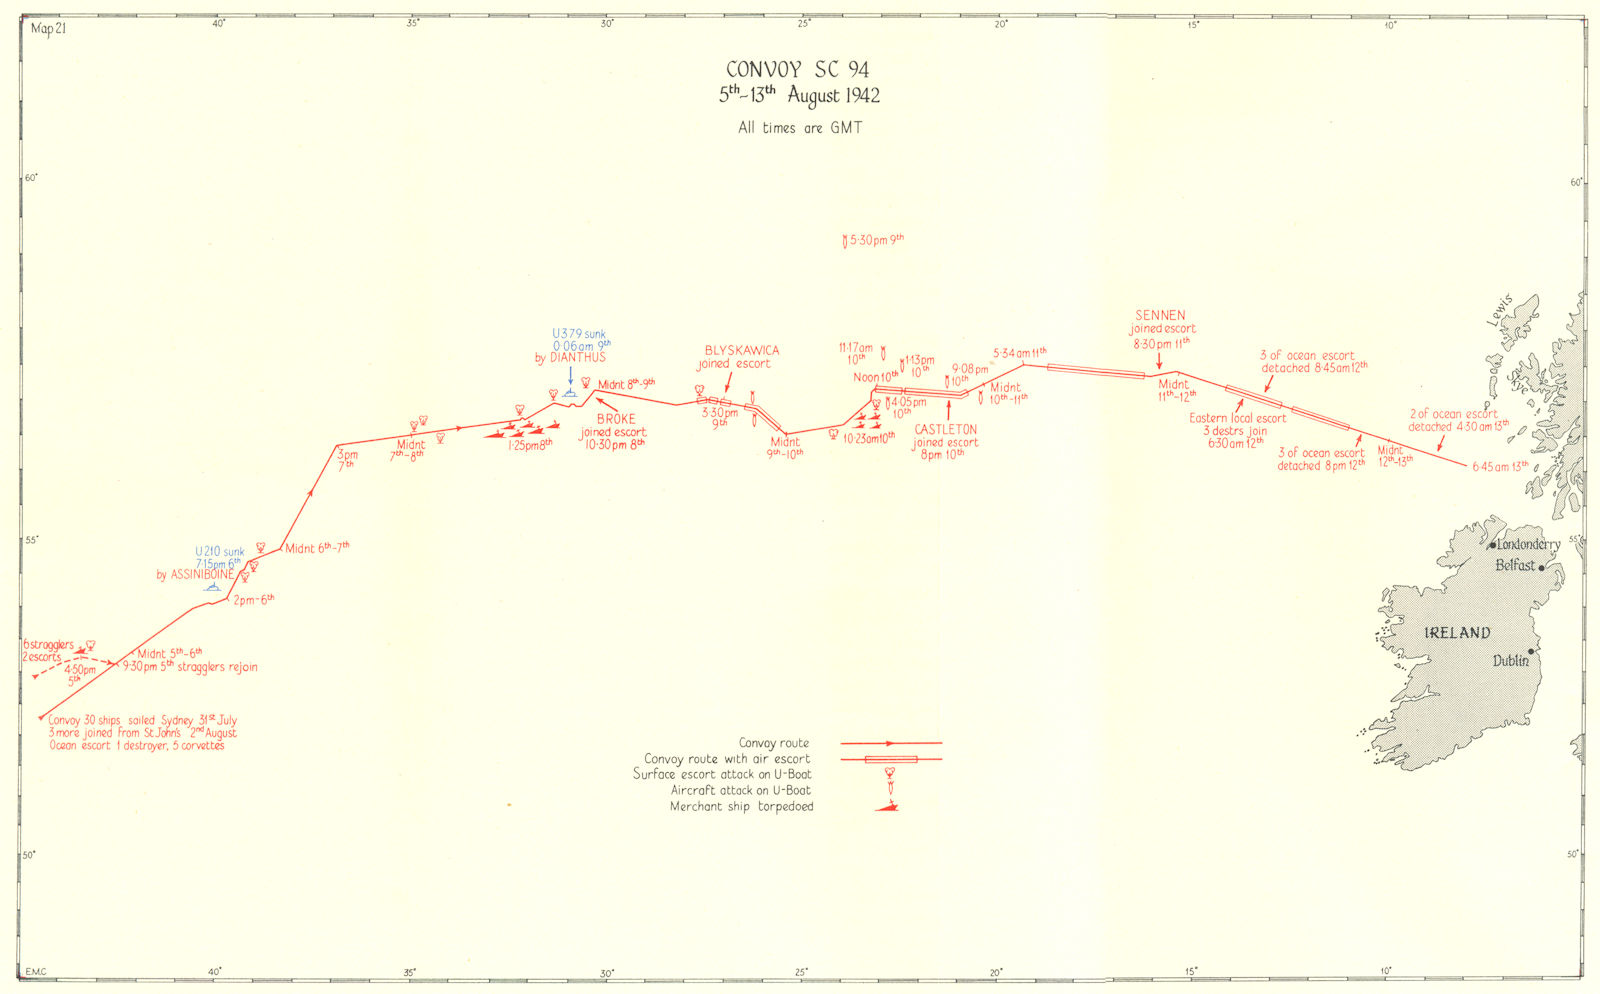 BATTLE OF THE ATLANTIC. 2nd campaign, convoy routes. SC 94 Aug 1942 1956 map